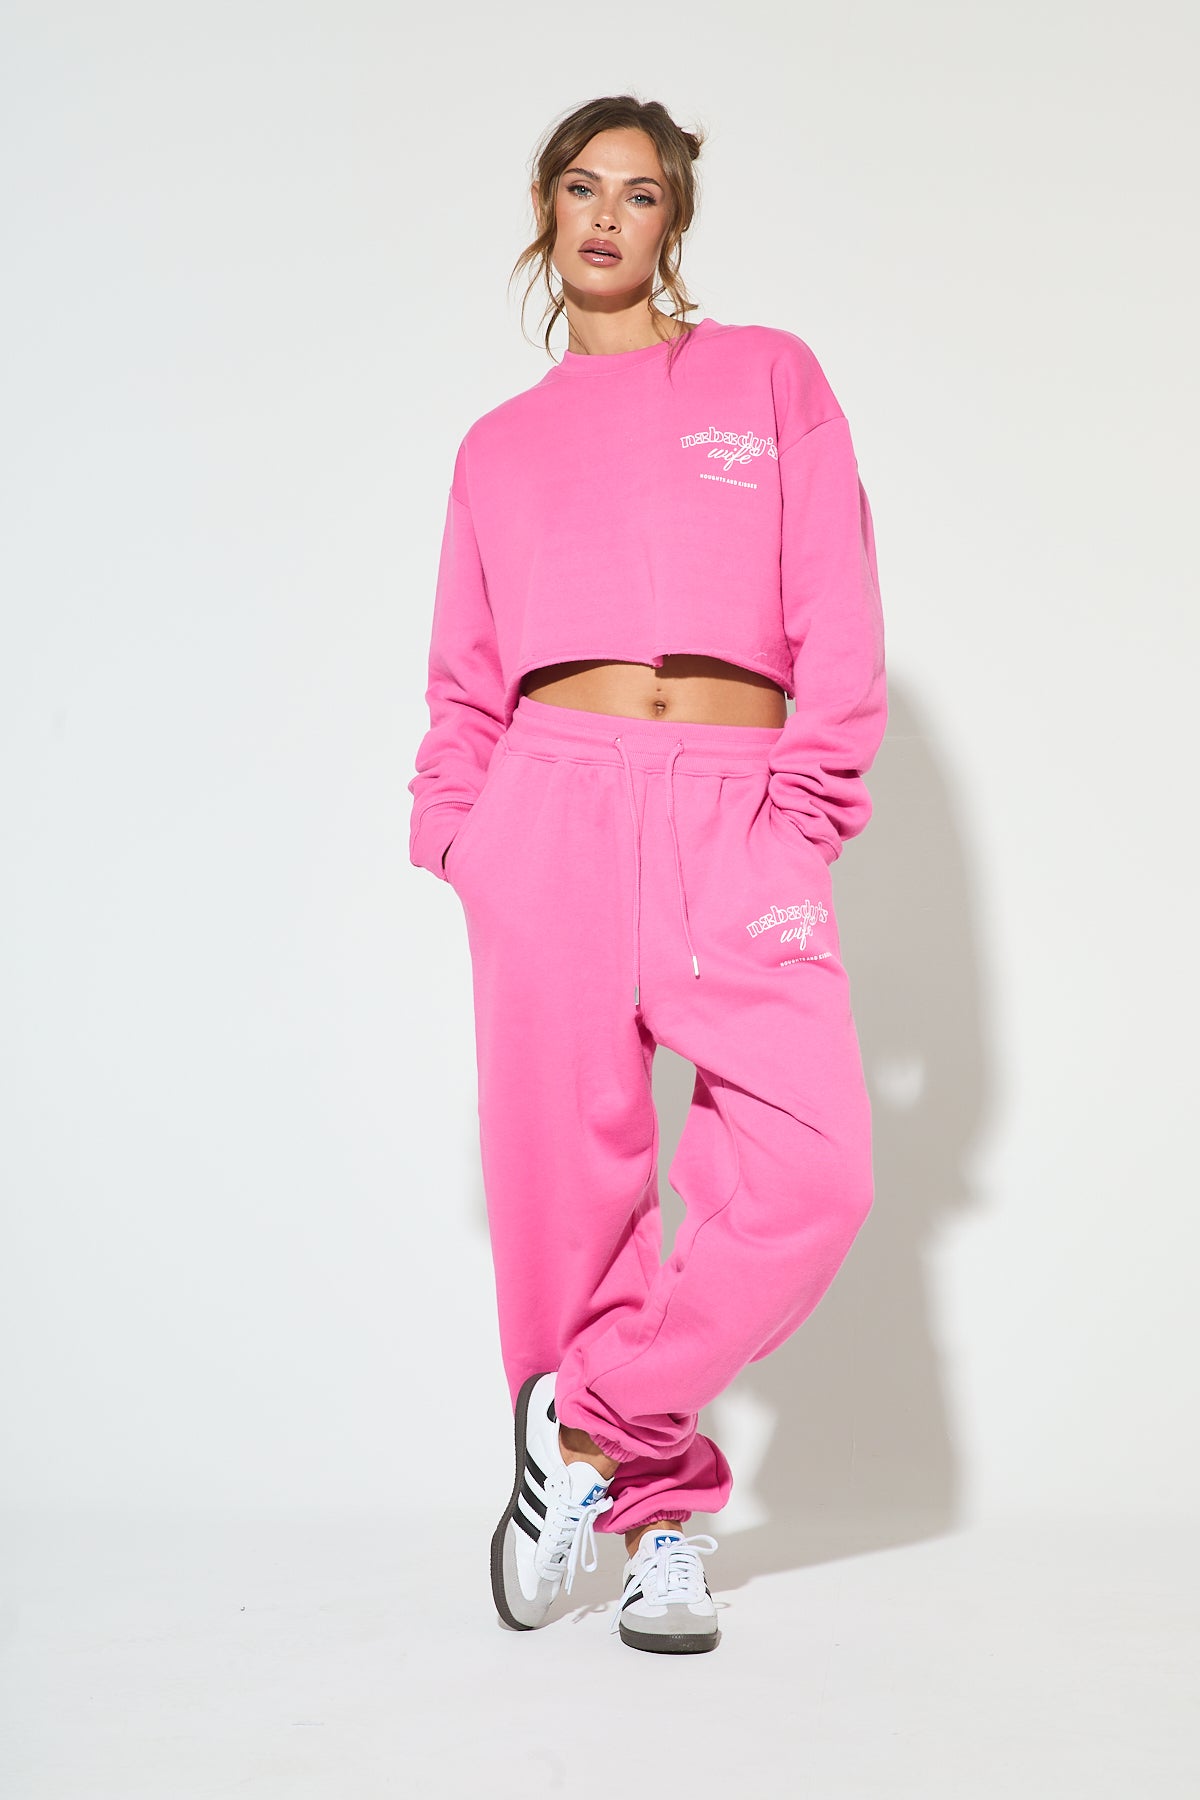 NOBODY'S WIFE Pink Cropped Tracksuit